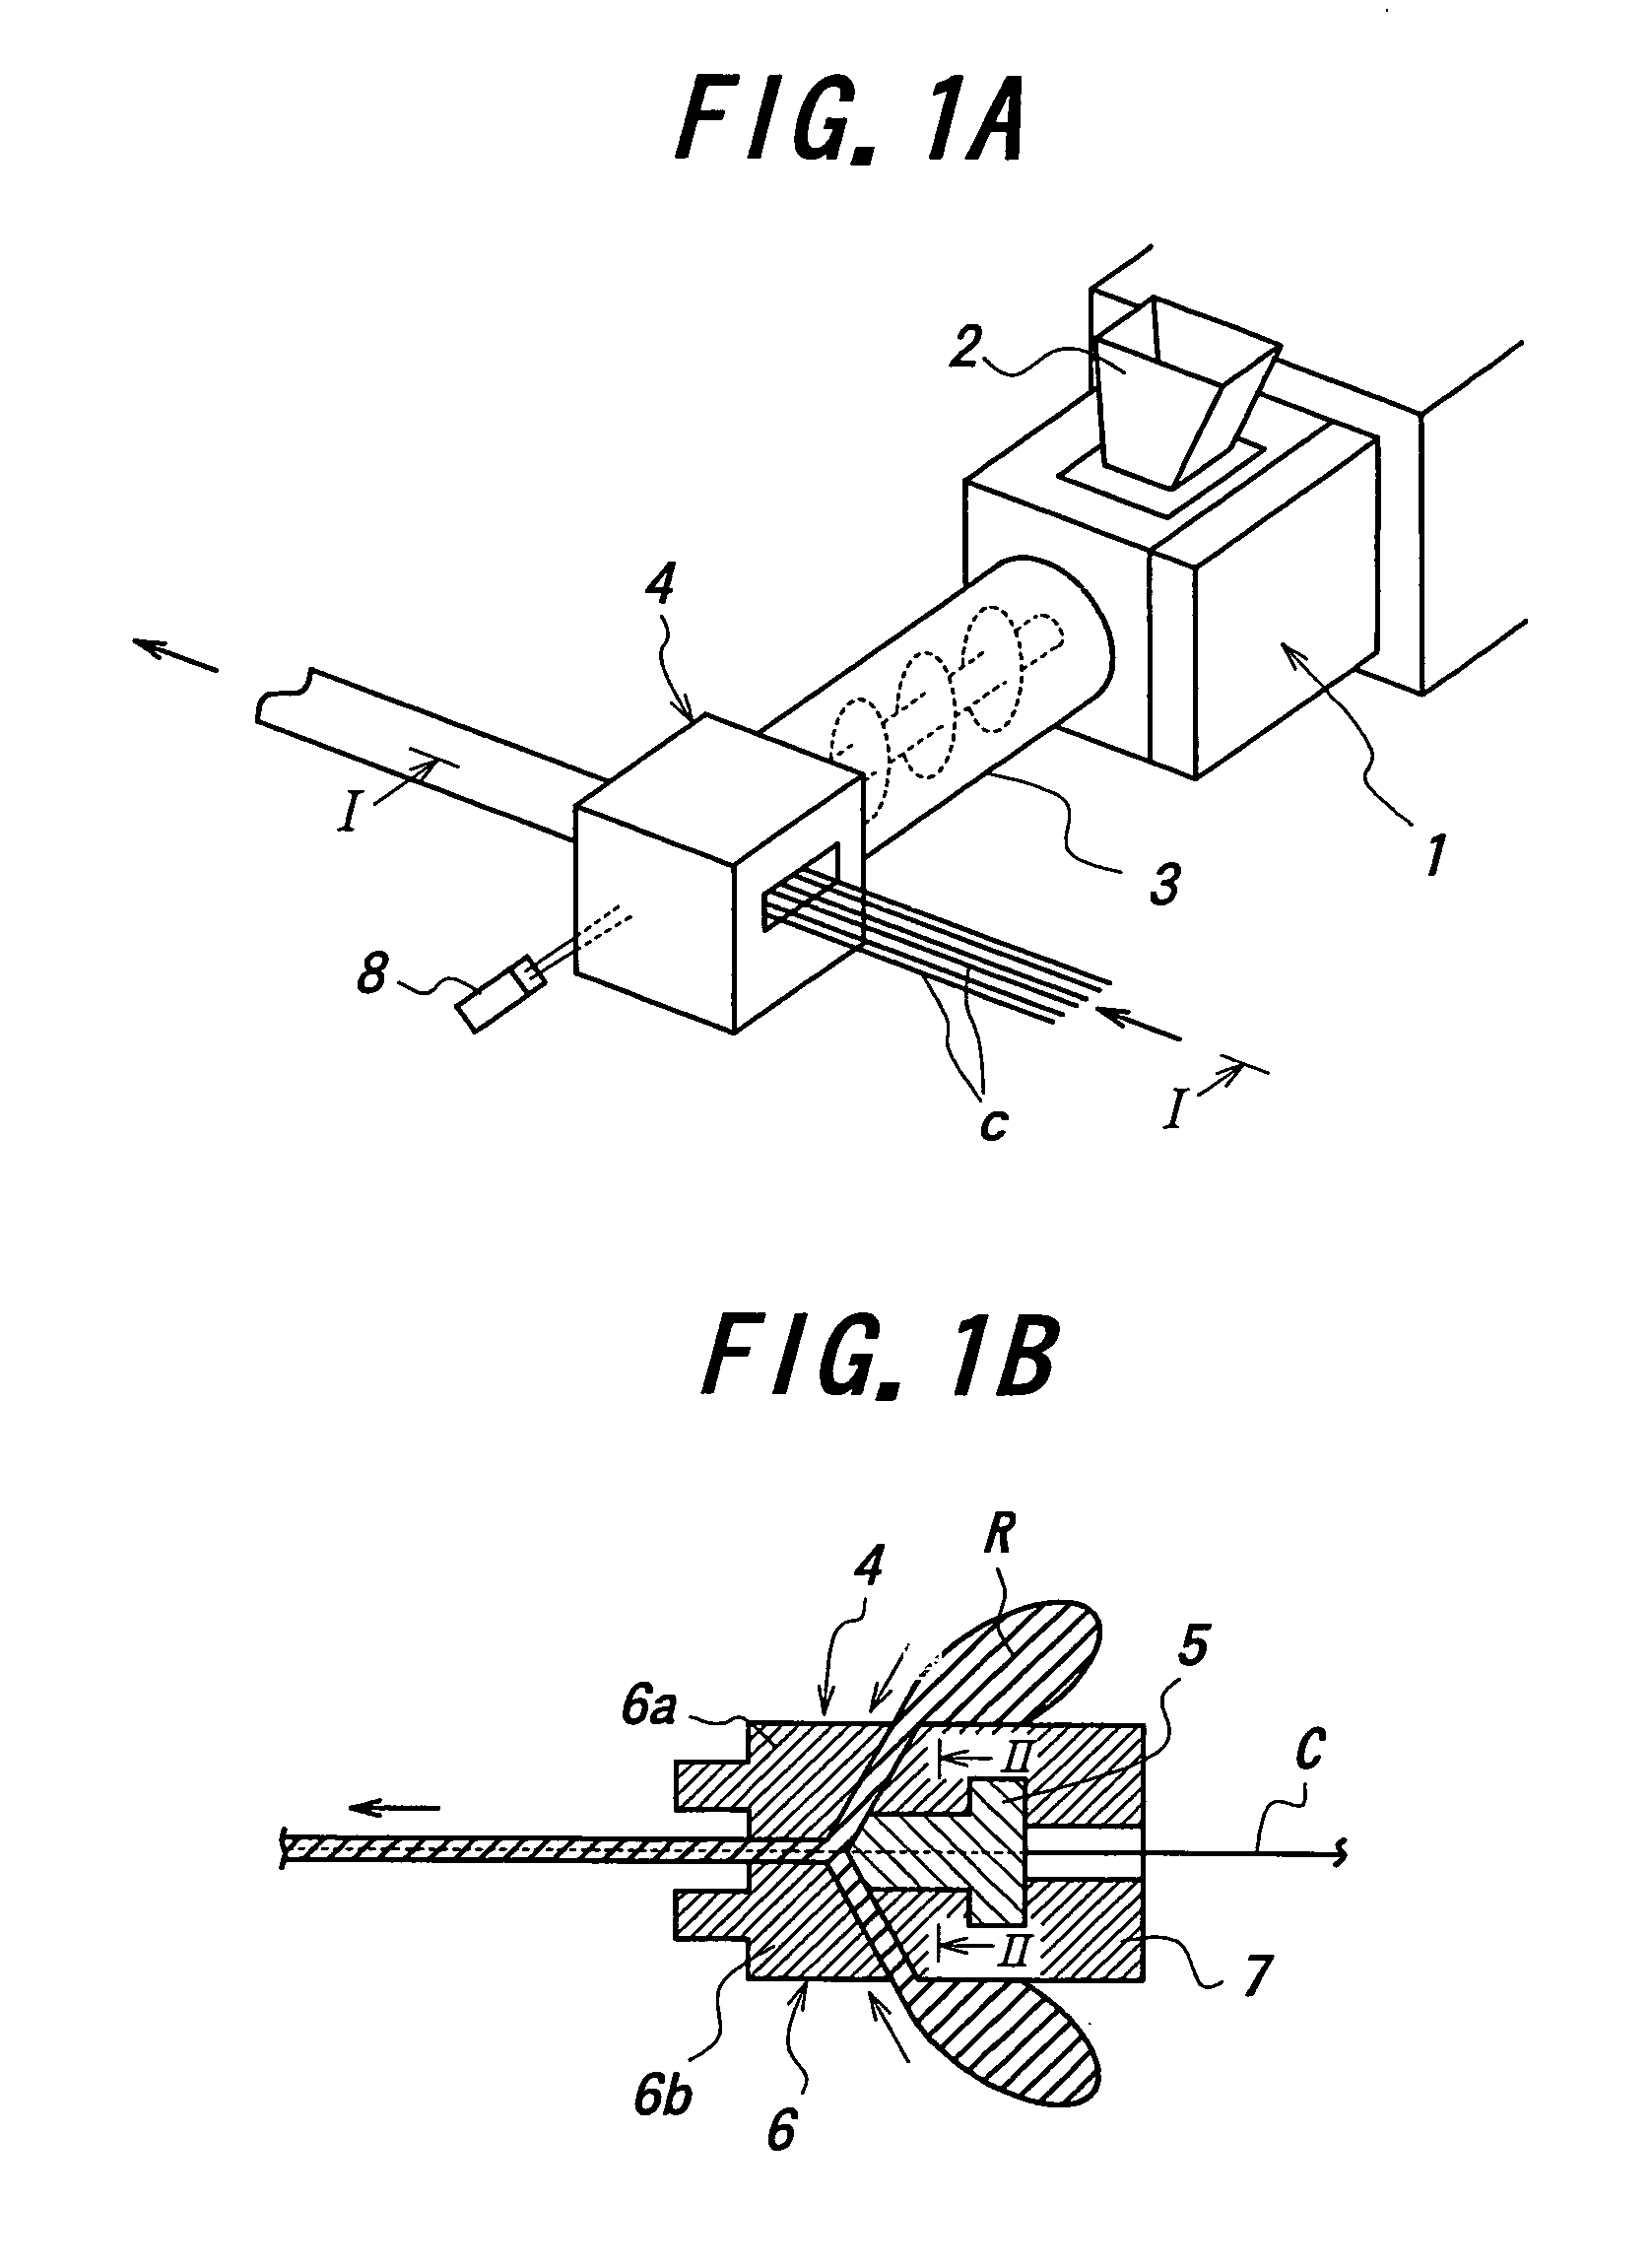 Apparatus for coating belt cord with rubber